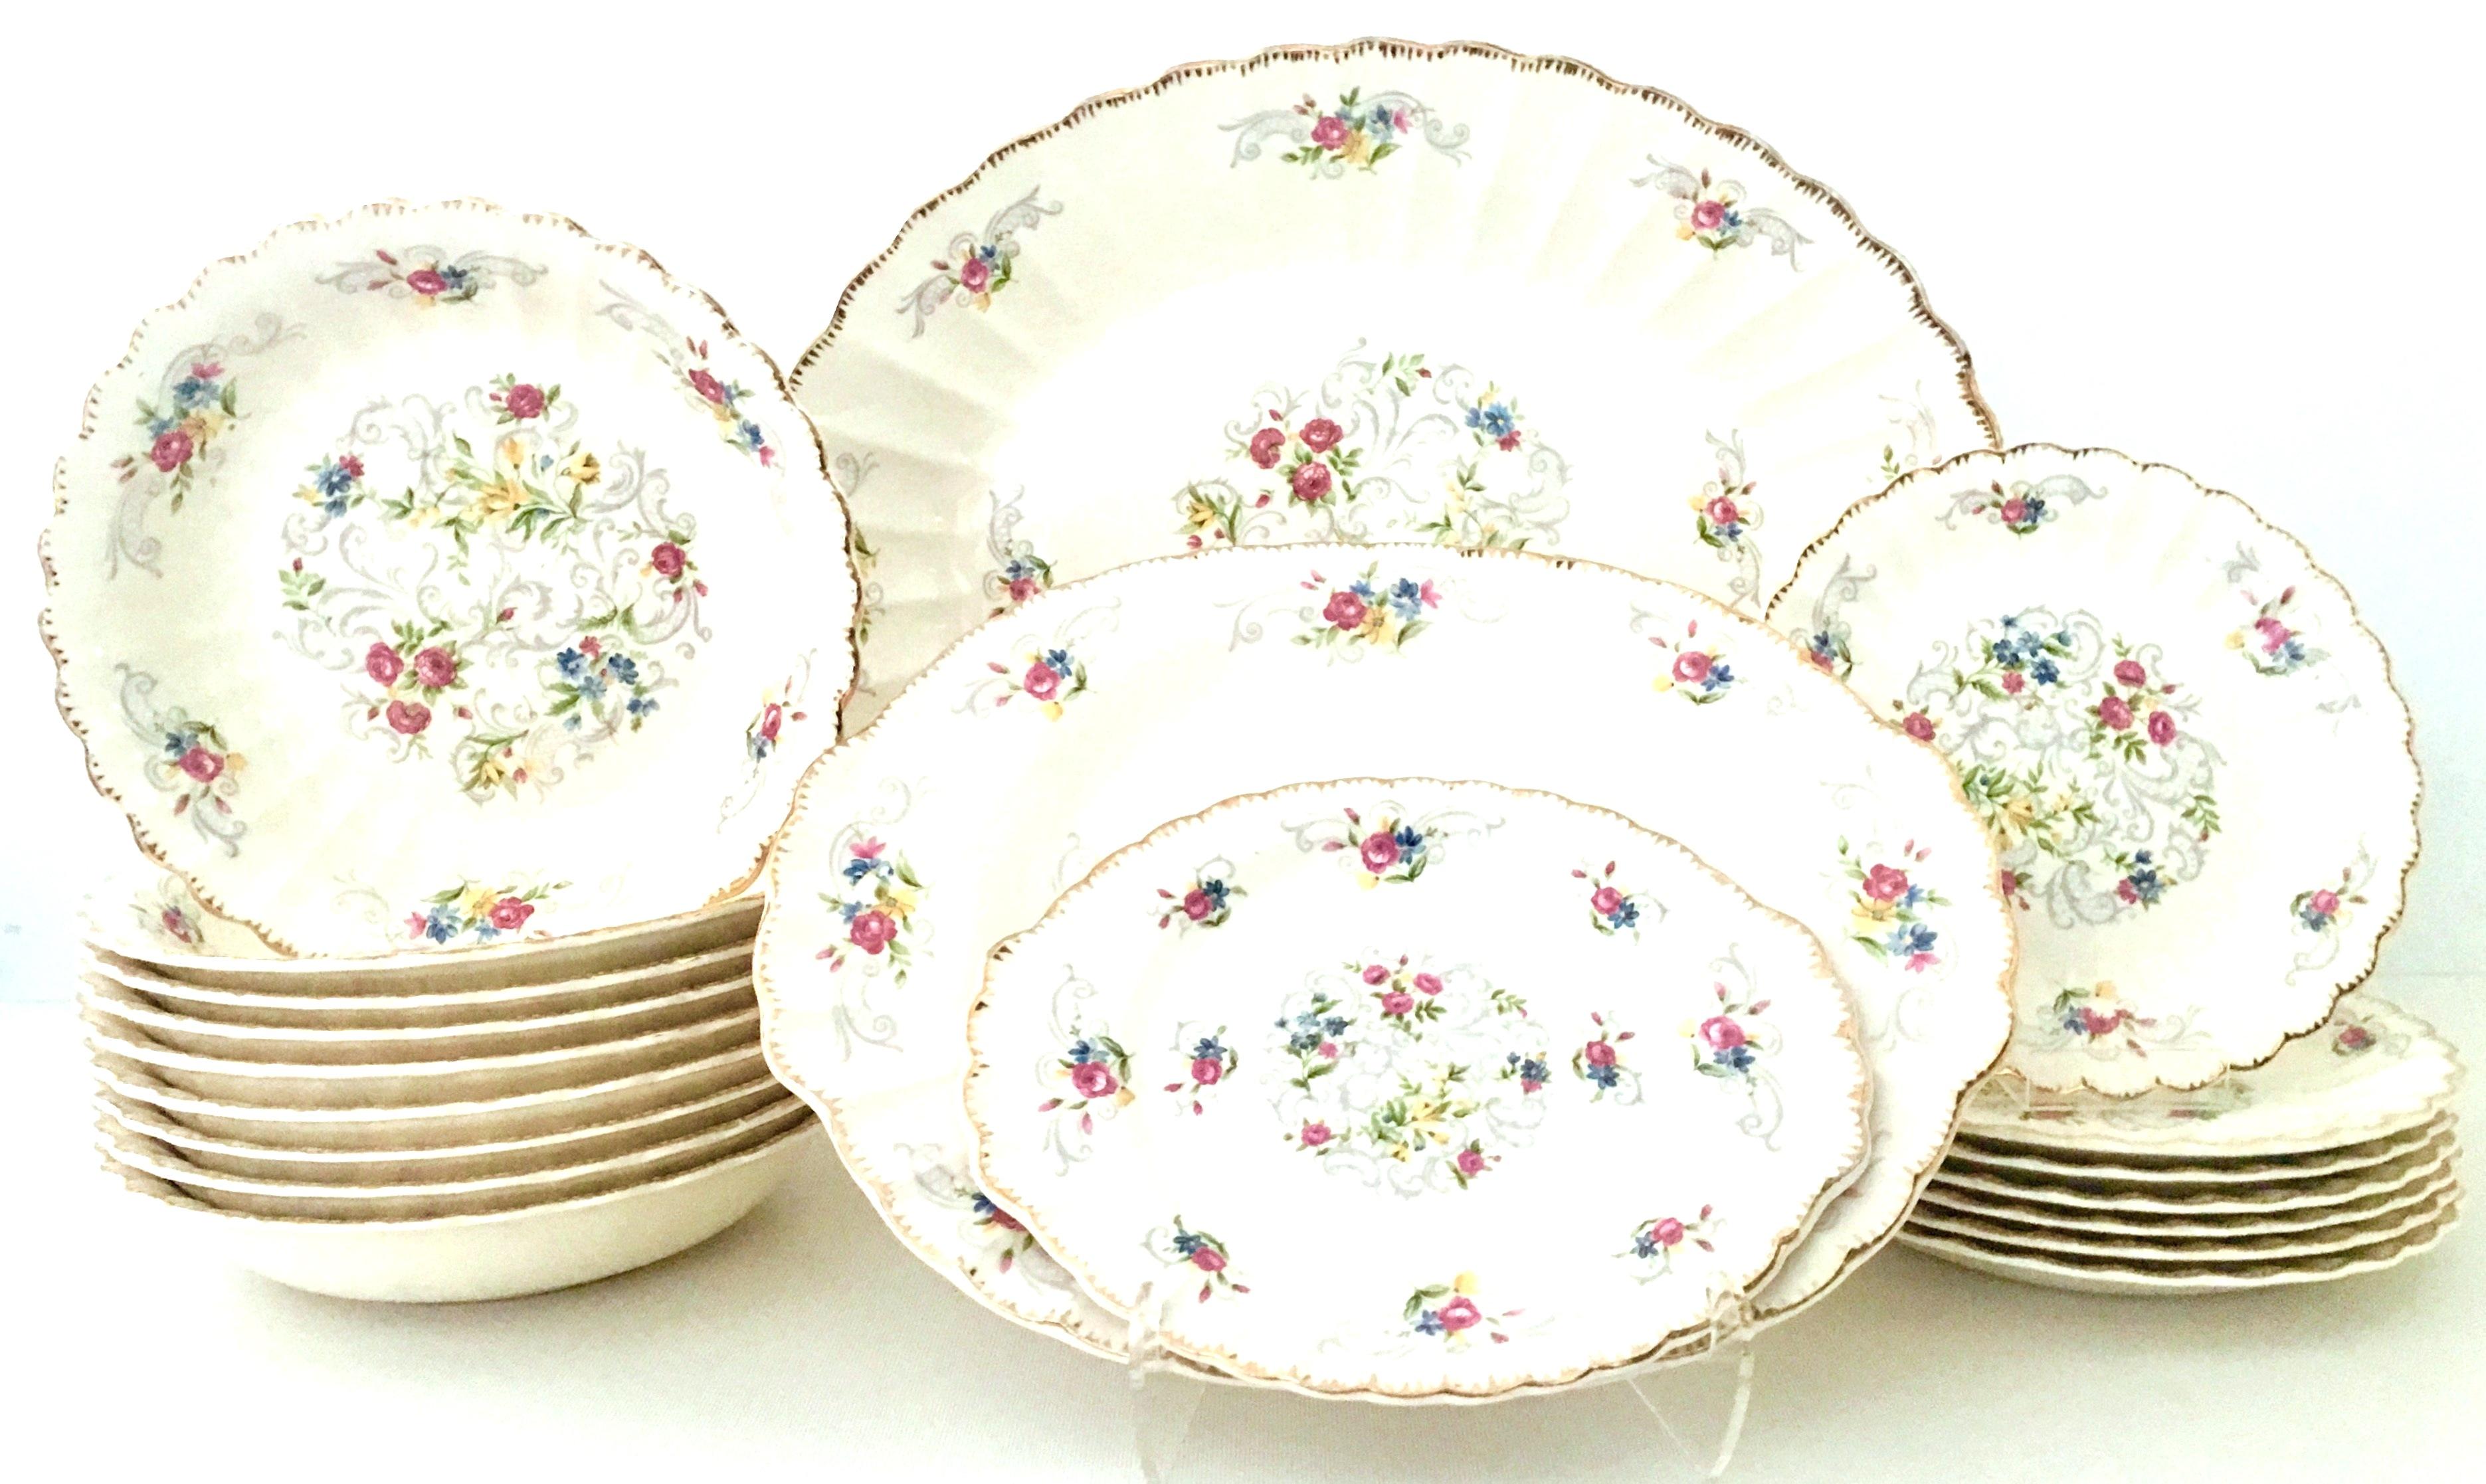 Mid-Century American Limoges set of 19 pieces By, Jennie Lind. Pattern features an off-white ground with hand-painted filigree 22-karat gold edge and a vibrant with muted gray scroll floral pattern. Each piece is signed on the underside, Made In The